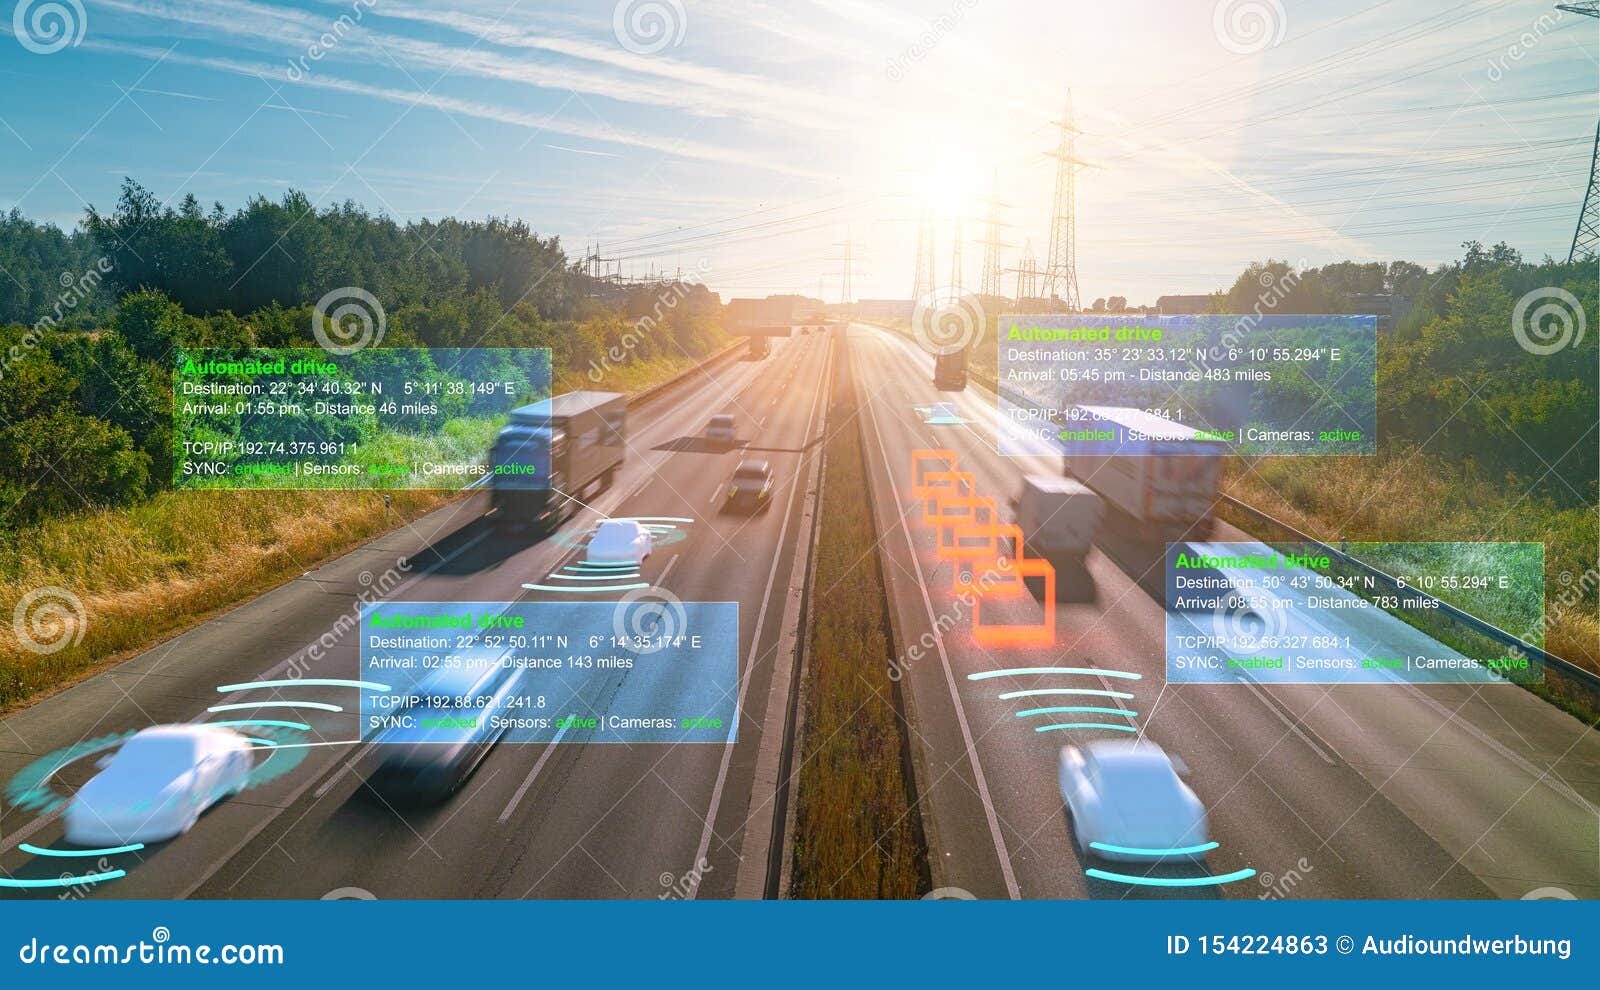 autonomous self-driving mode vehicle on highway road iot concept with graphic sensor radar signal system